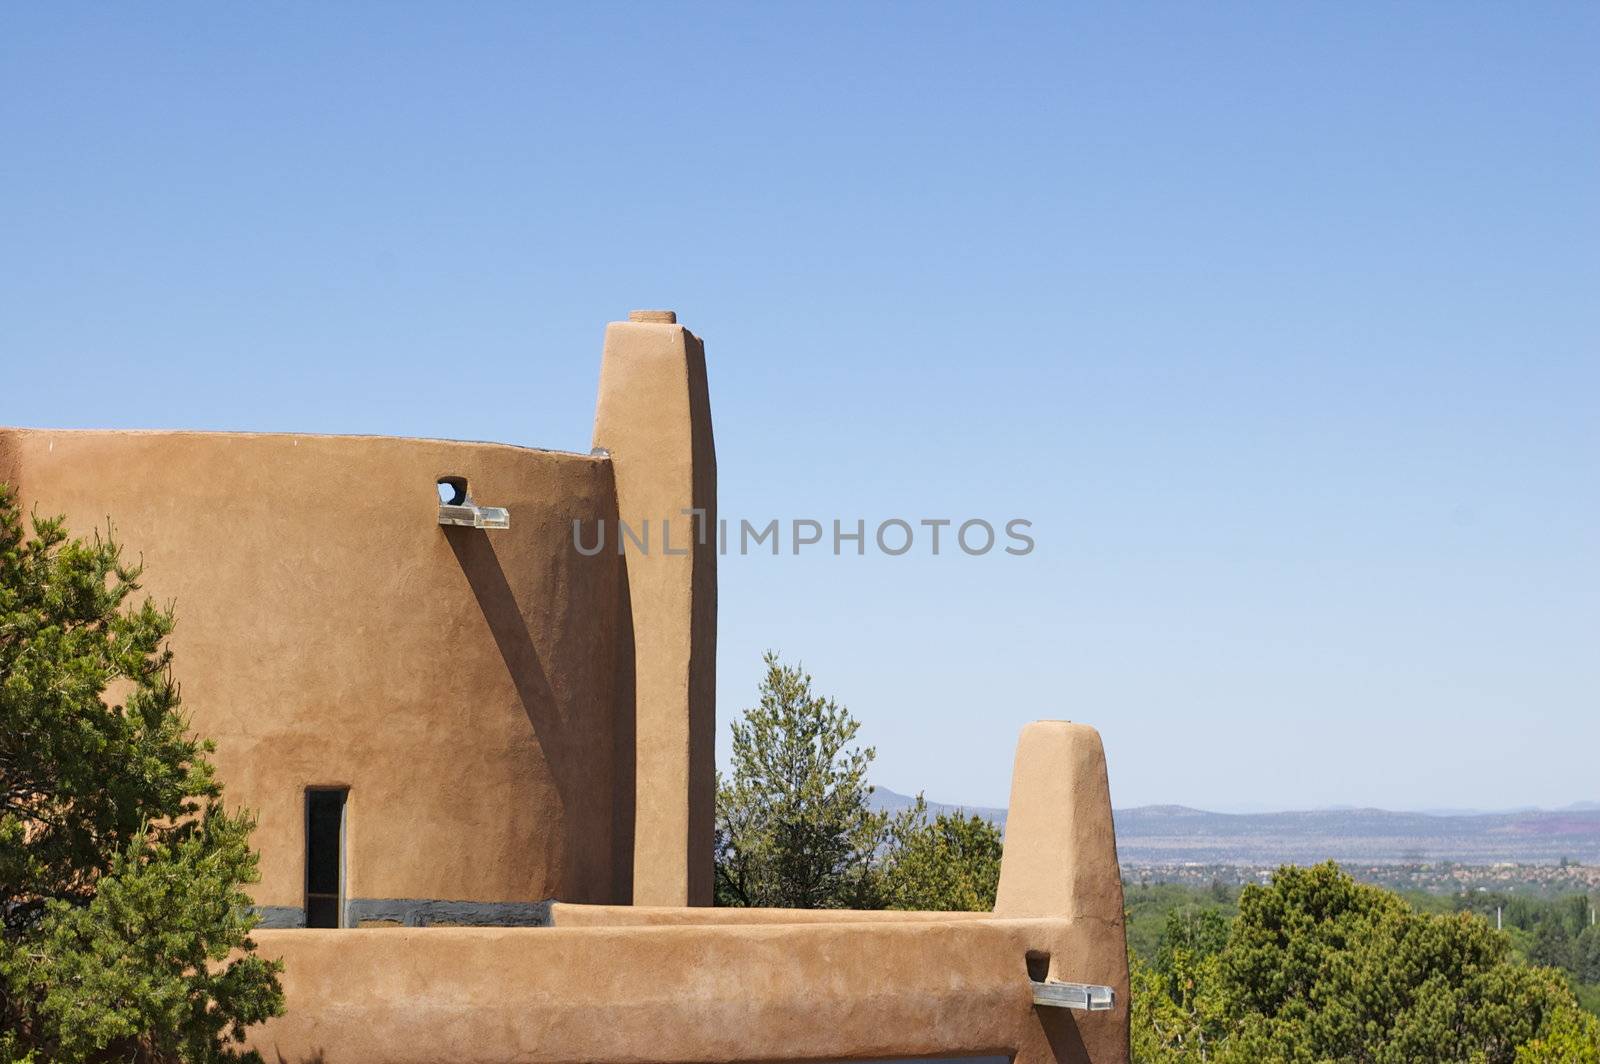 New Mexico curved Adobe Building with a backdrop looking out over Santa Fe, against a blue sky with copy space.